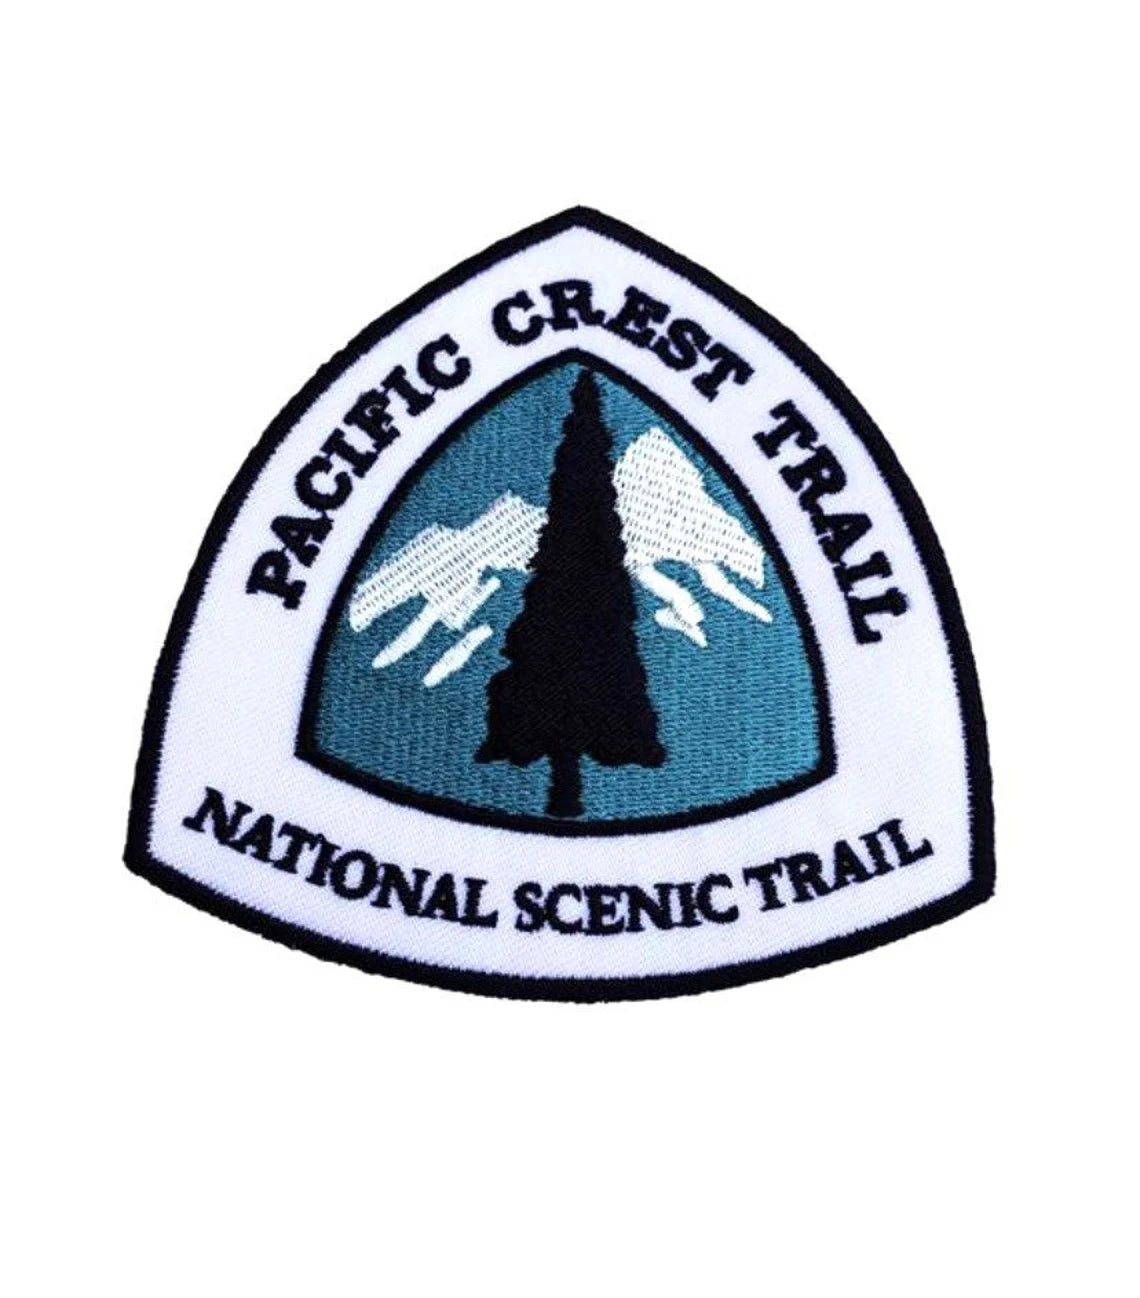 Pacific Crest Trail National Scenic Trail Patch (3.5 Inch) Iron-on Badge